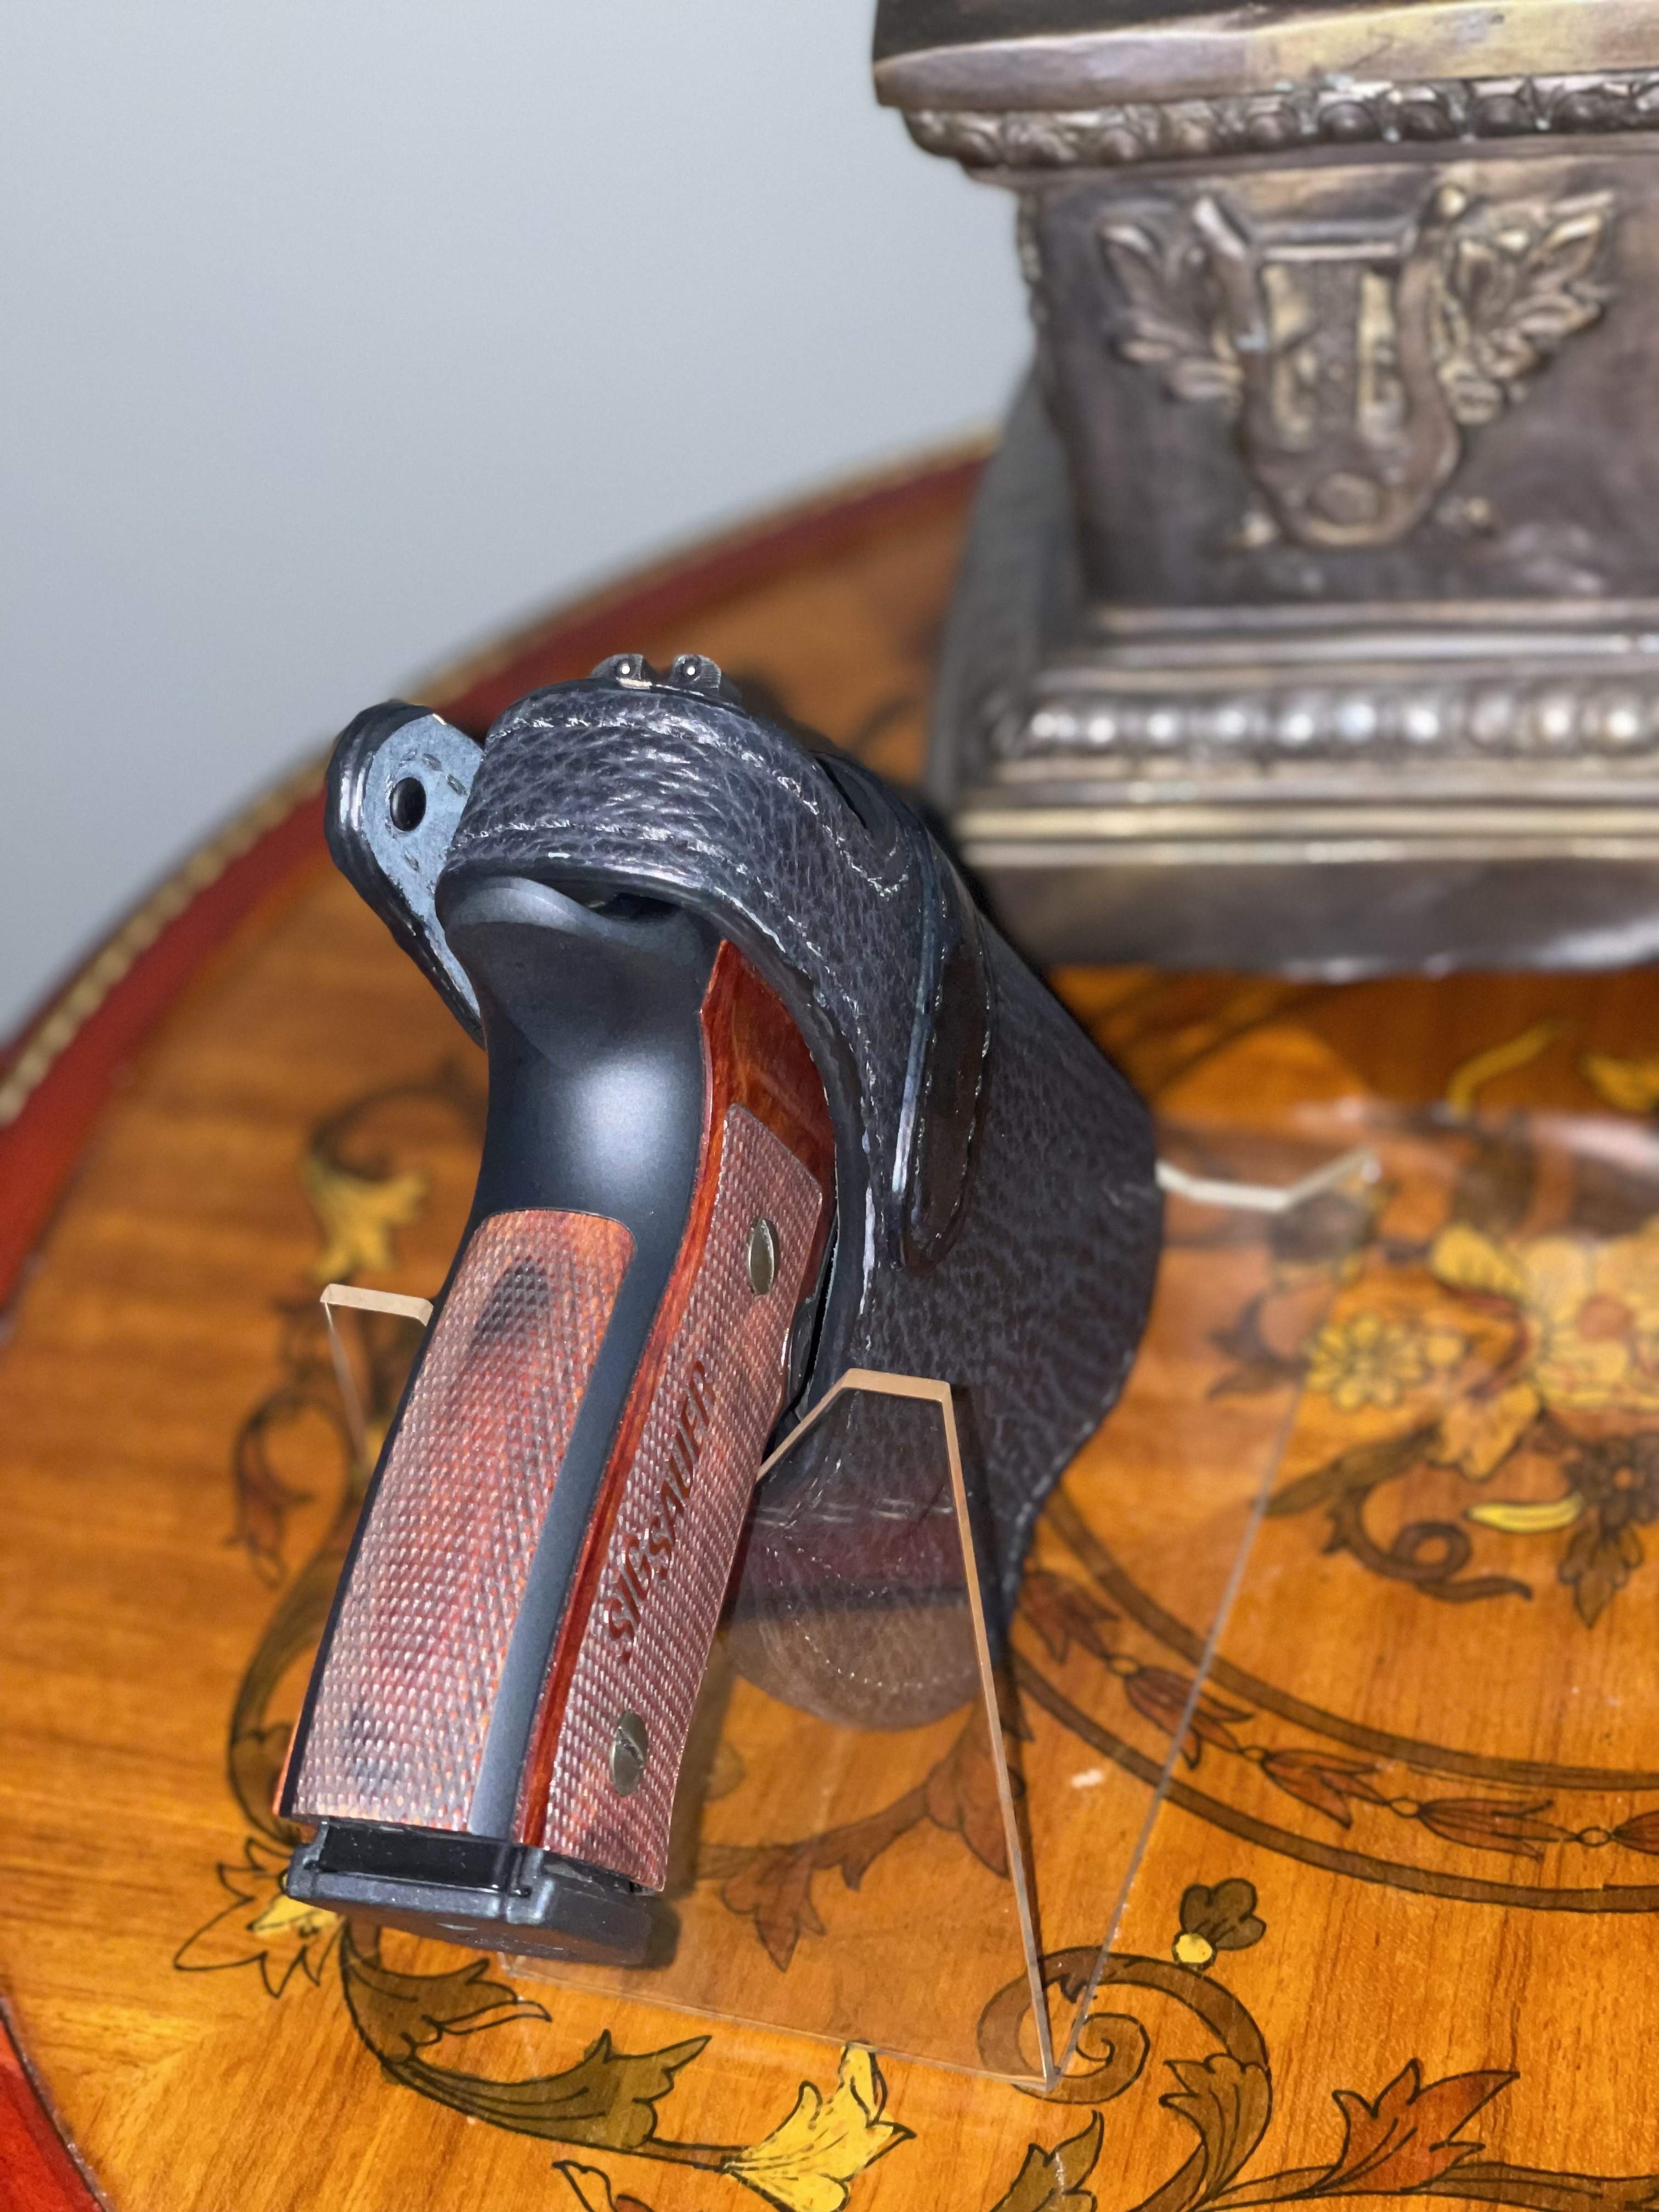 View of Thumb-break in a paddle holster